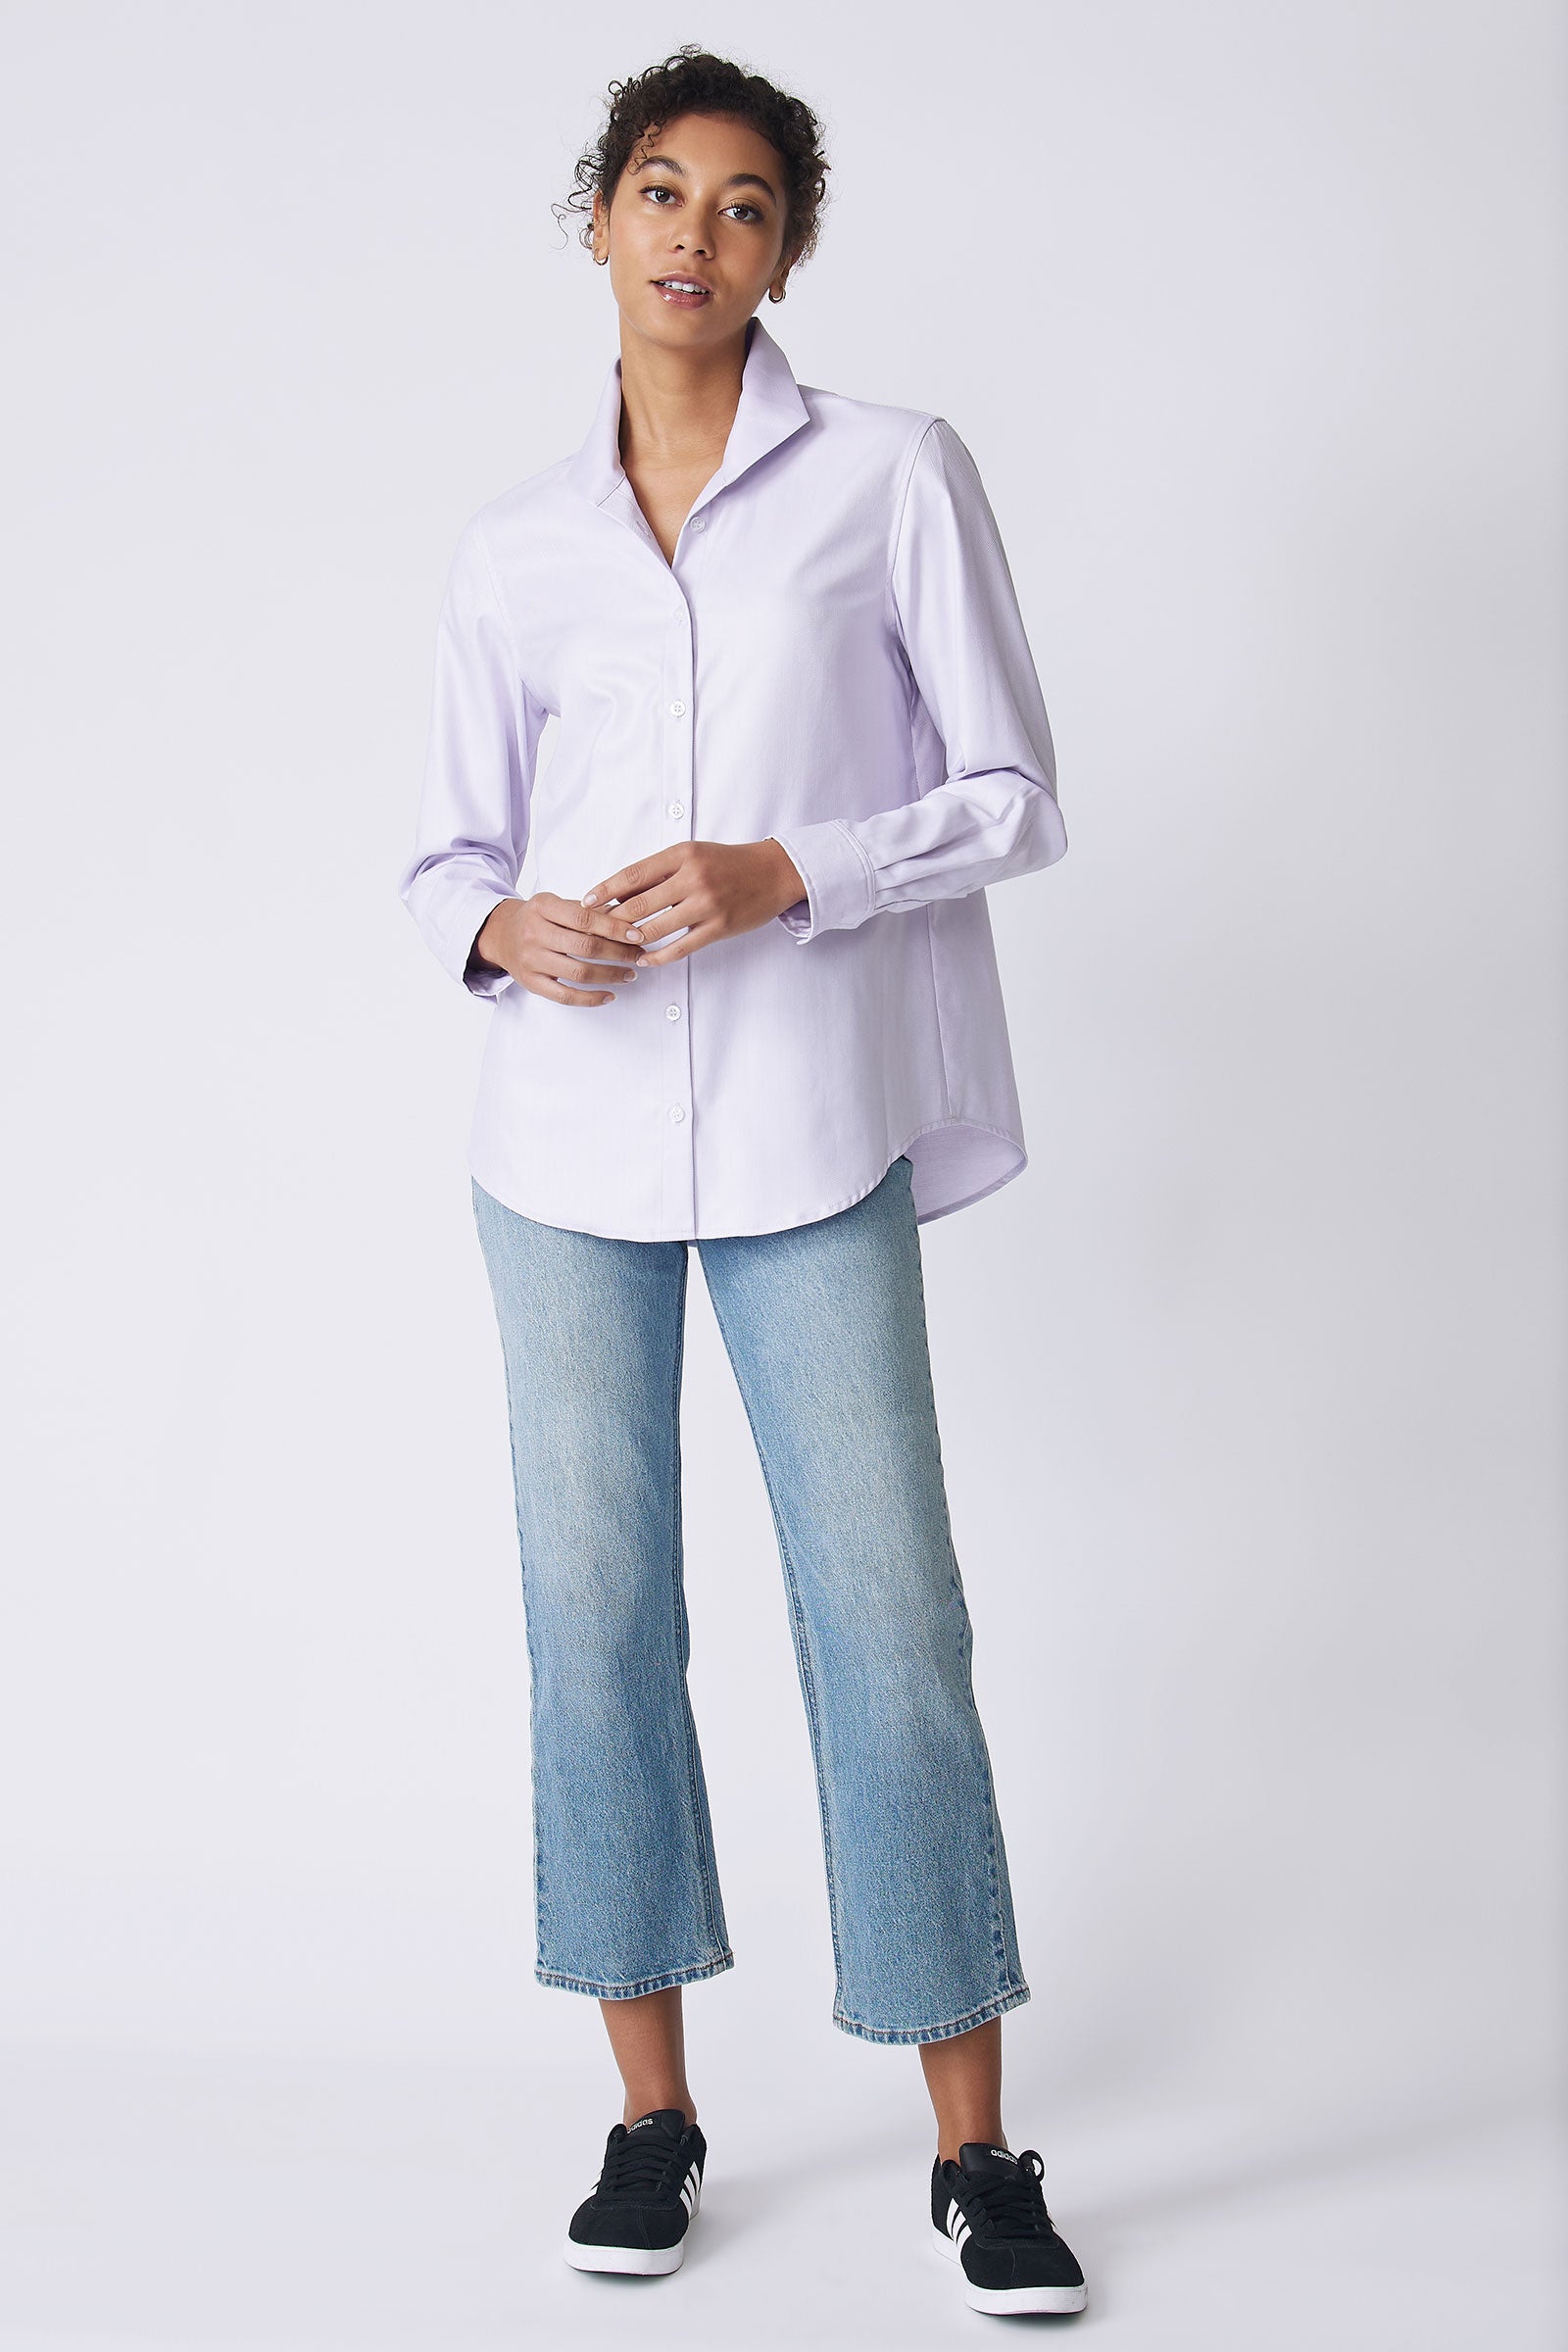  Kal Rieman Ginna Box Pleat Tailored Shirt in lavender fine herringbone on model front view full holding hands